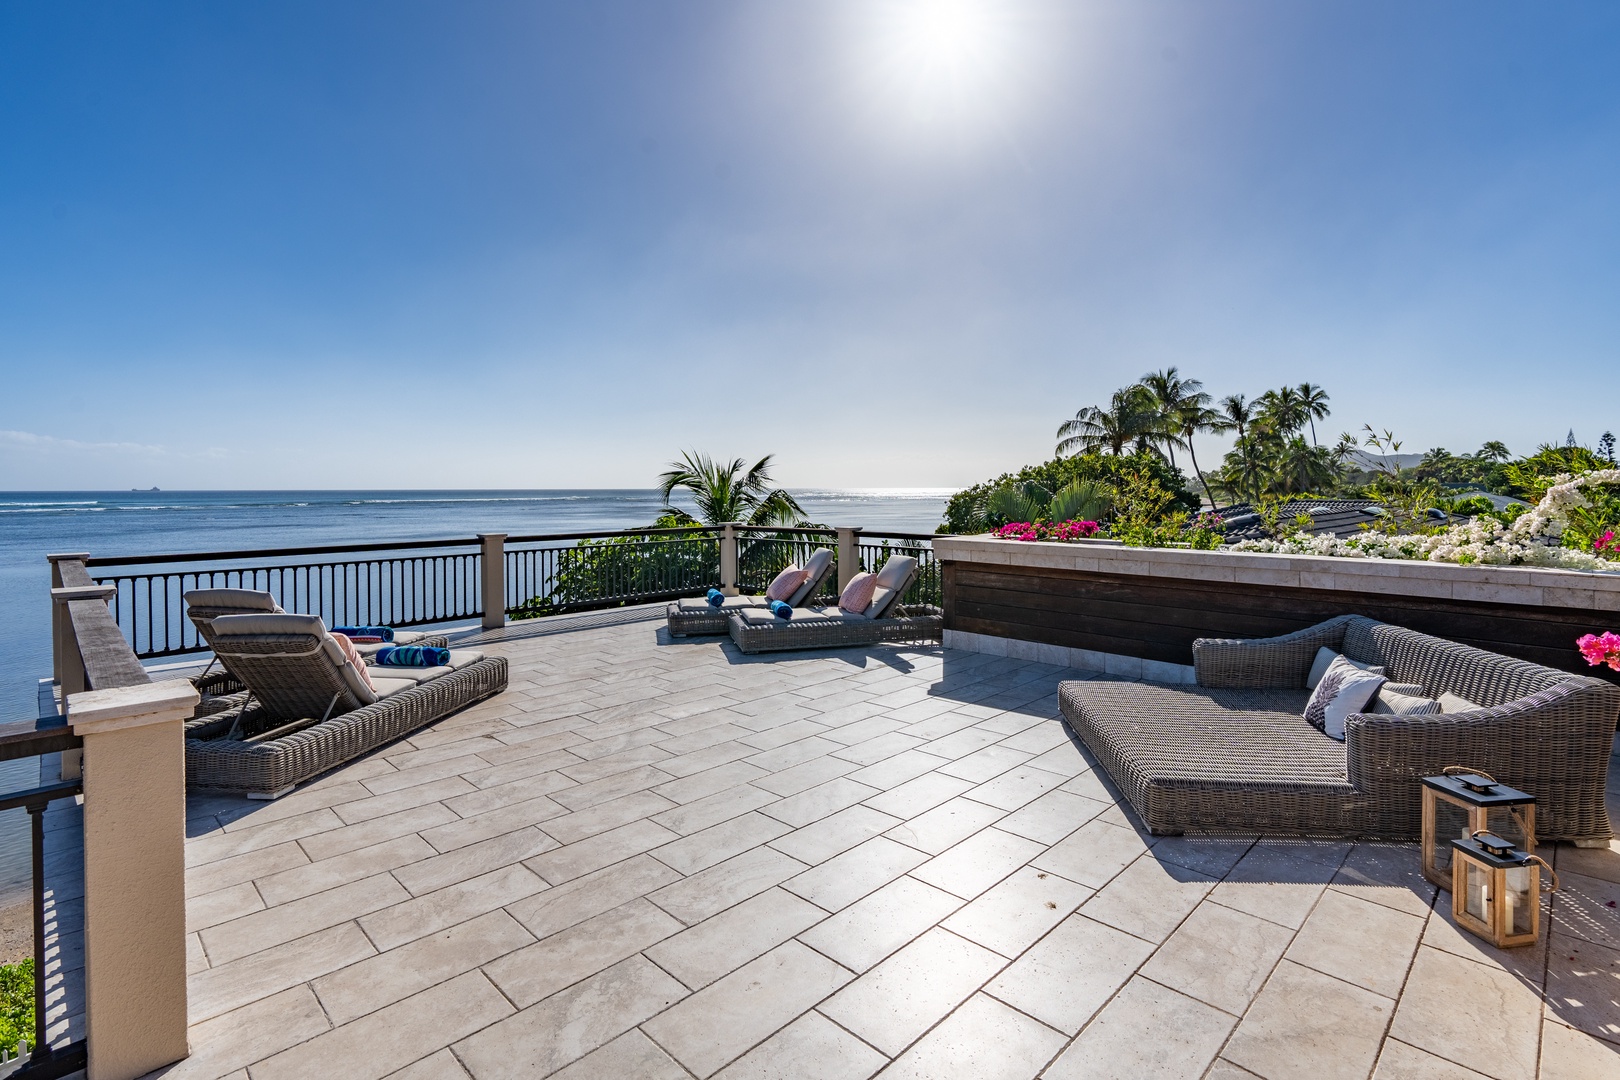 Honolulu Vacation Rentals, Wailupe Seaside - Soak up on the private rooftop deck.